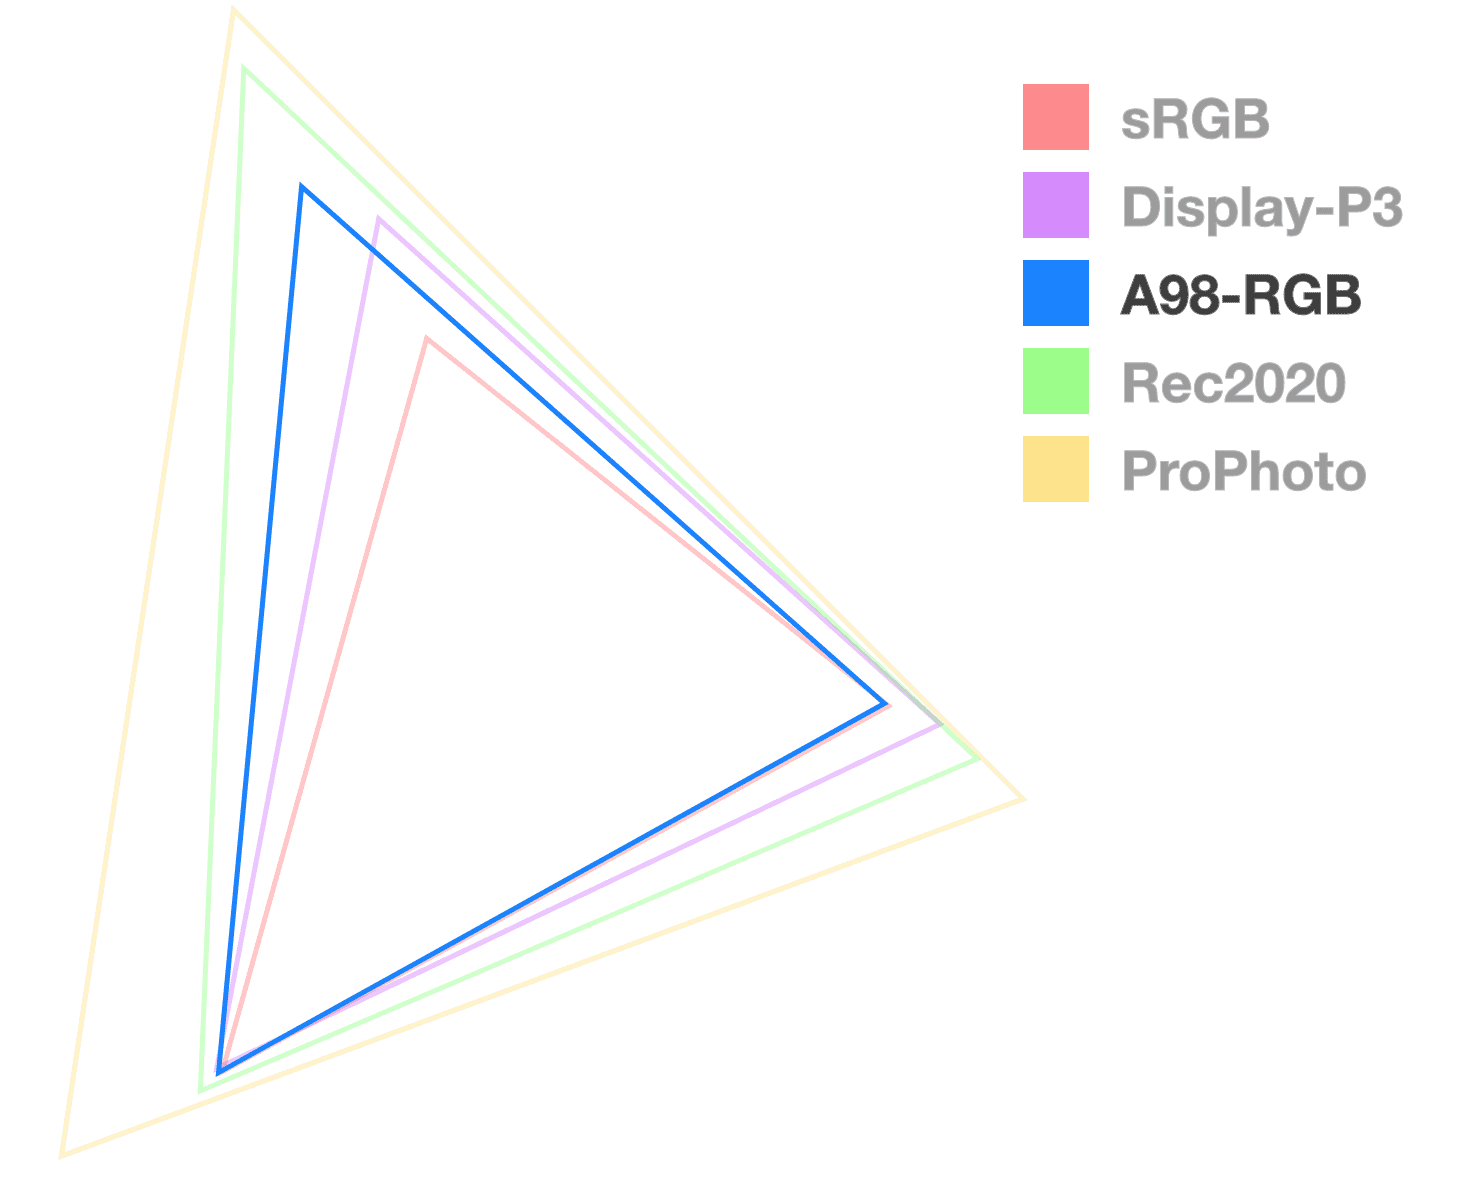 A98 triangle is the only one fully opaque, to help
  visualize the size of the gamut. It looks like the middle sizes triangle.